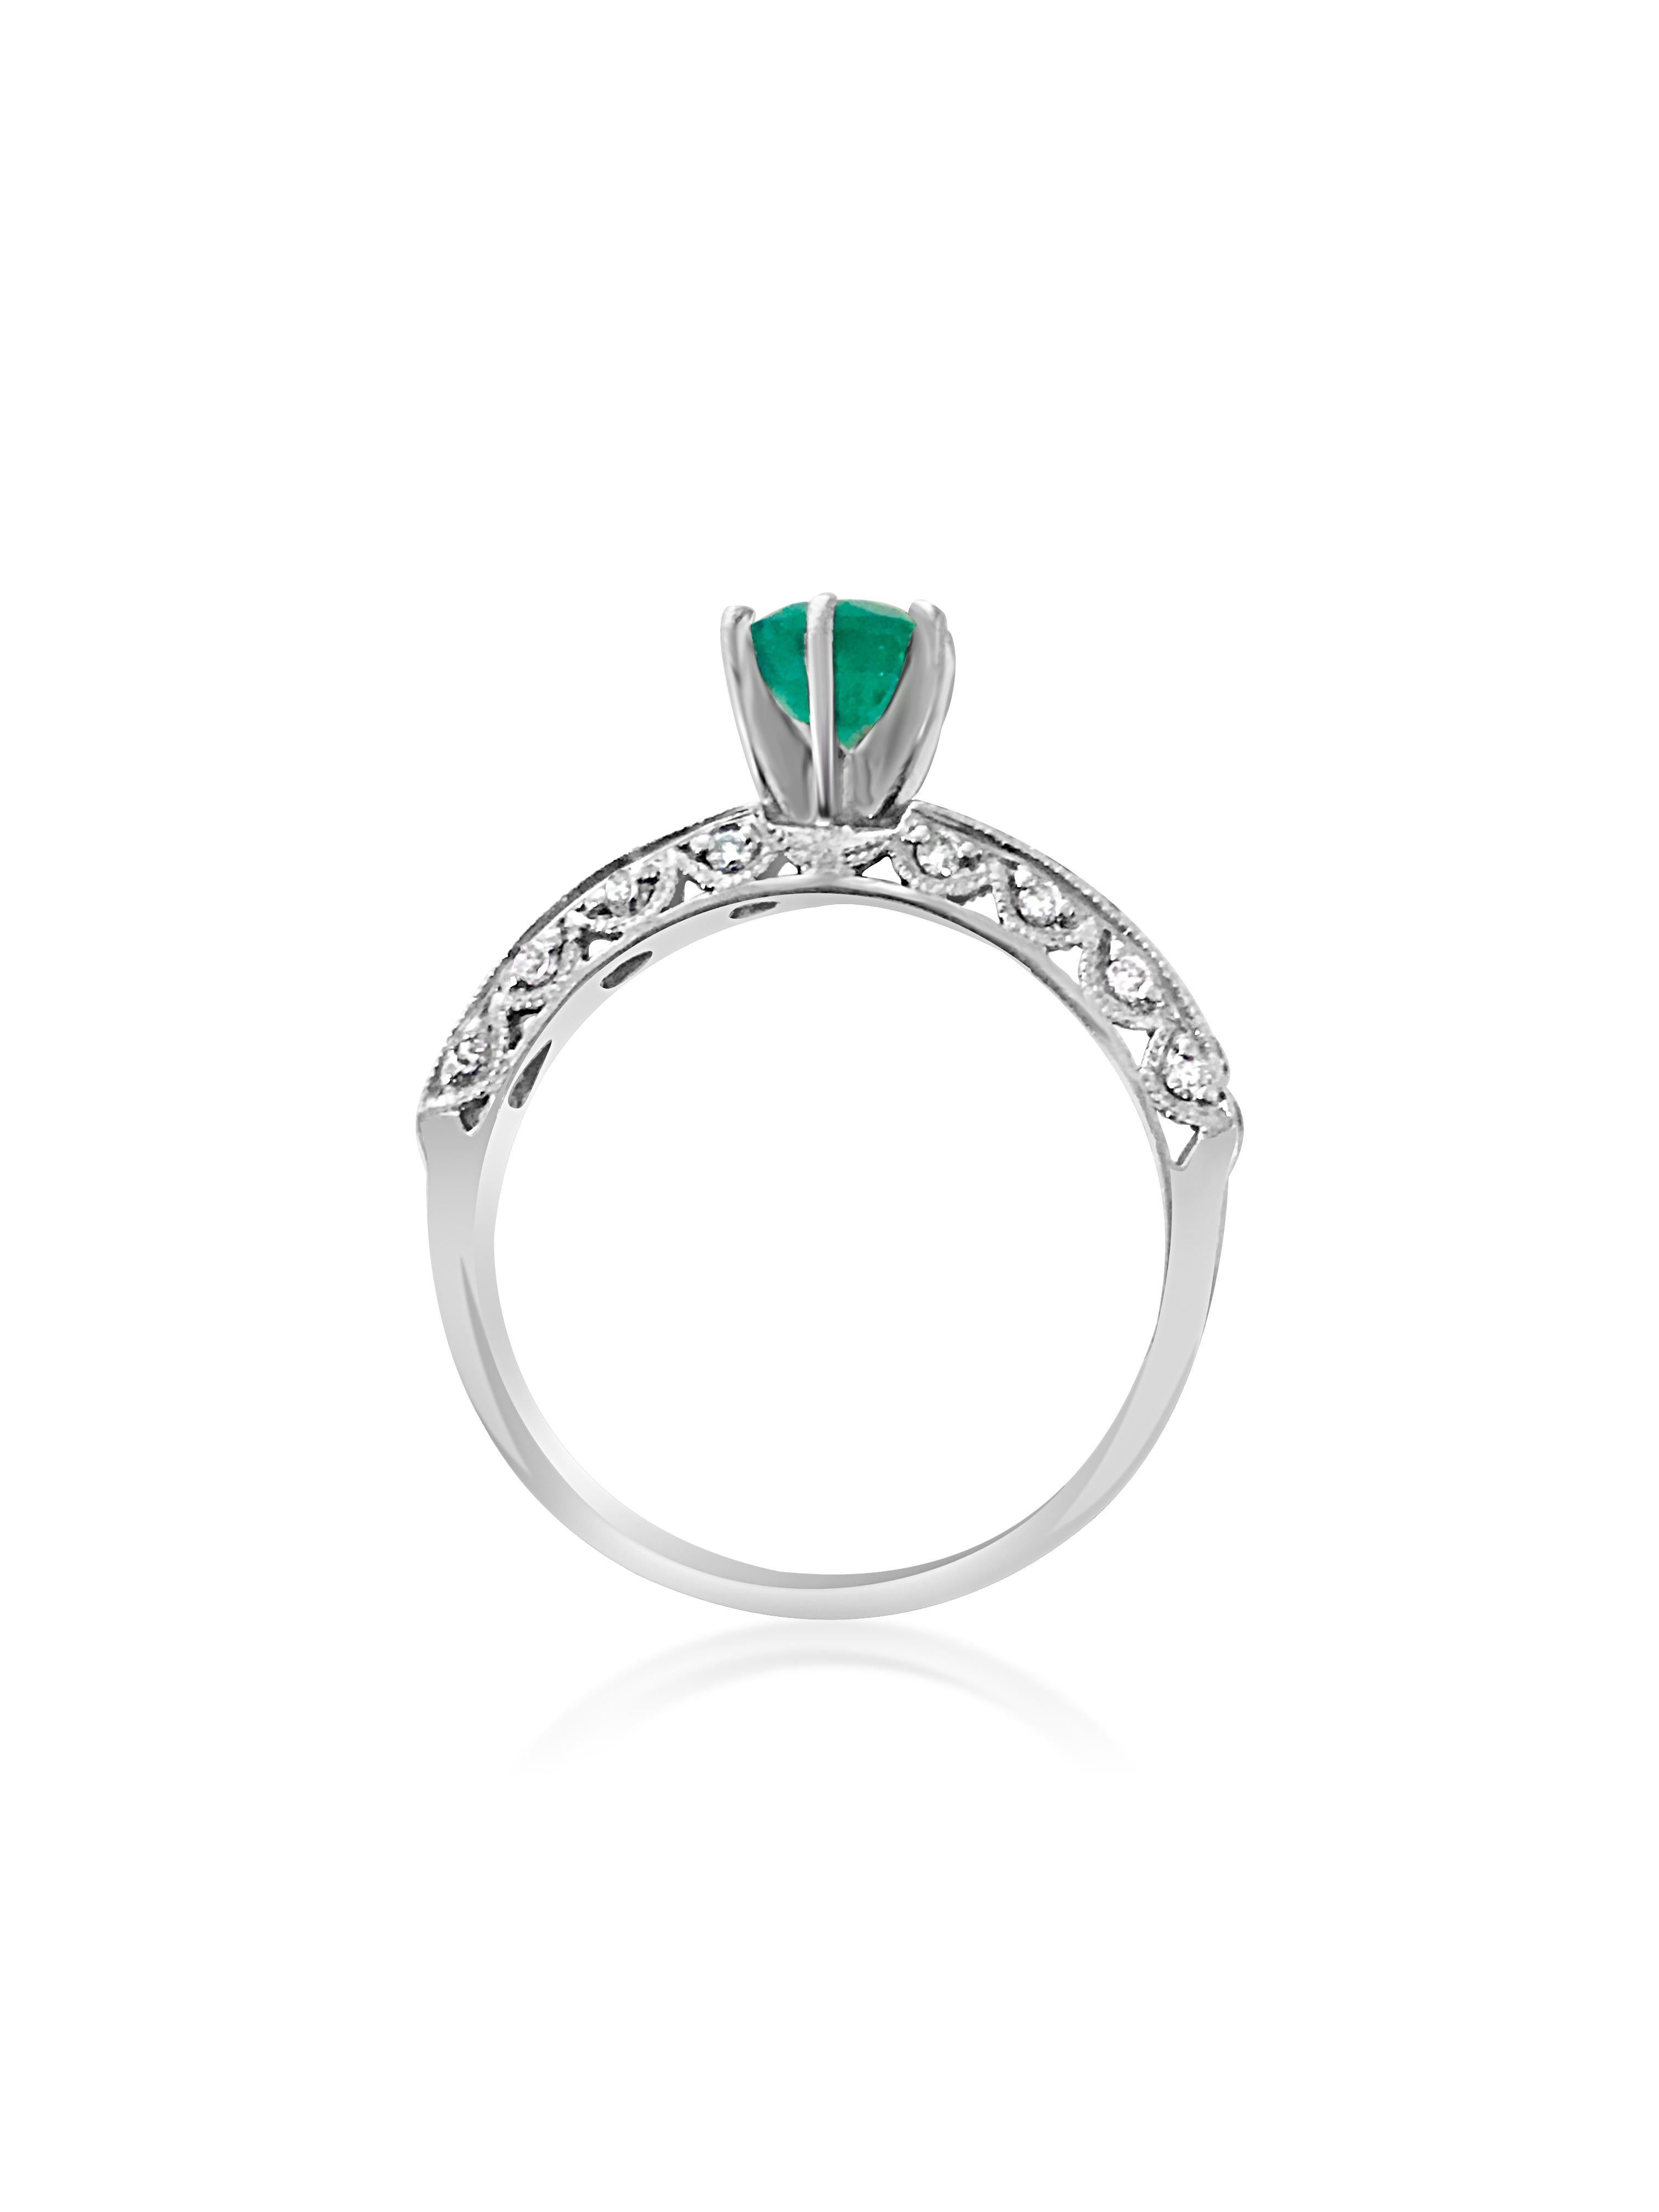 Round Cut 1.00 Carat Colombian Emerald Diamond Engagement Ring For Sale